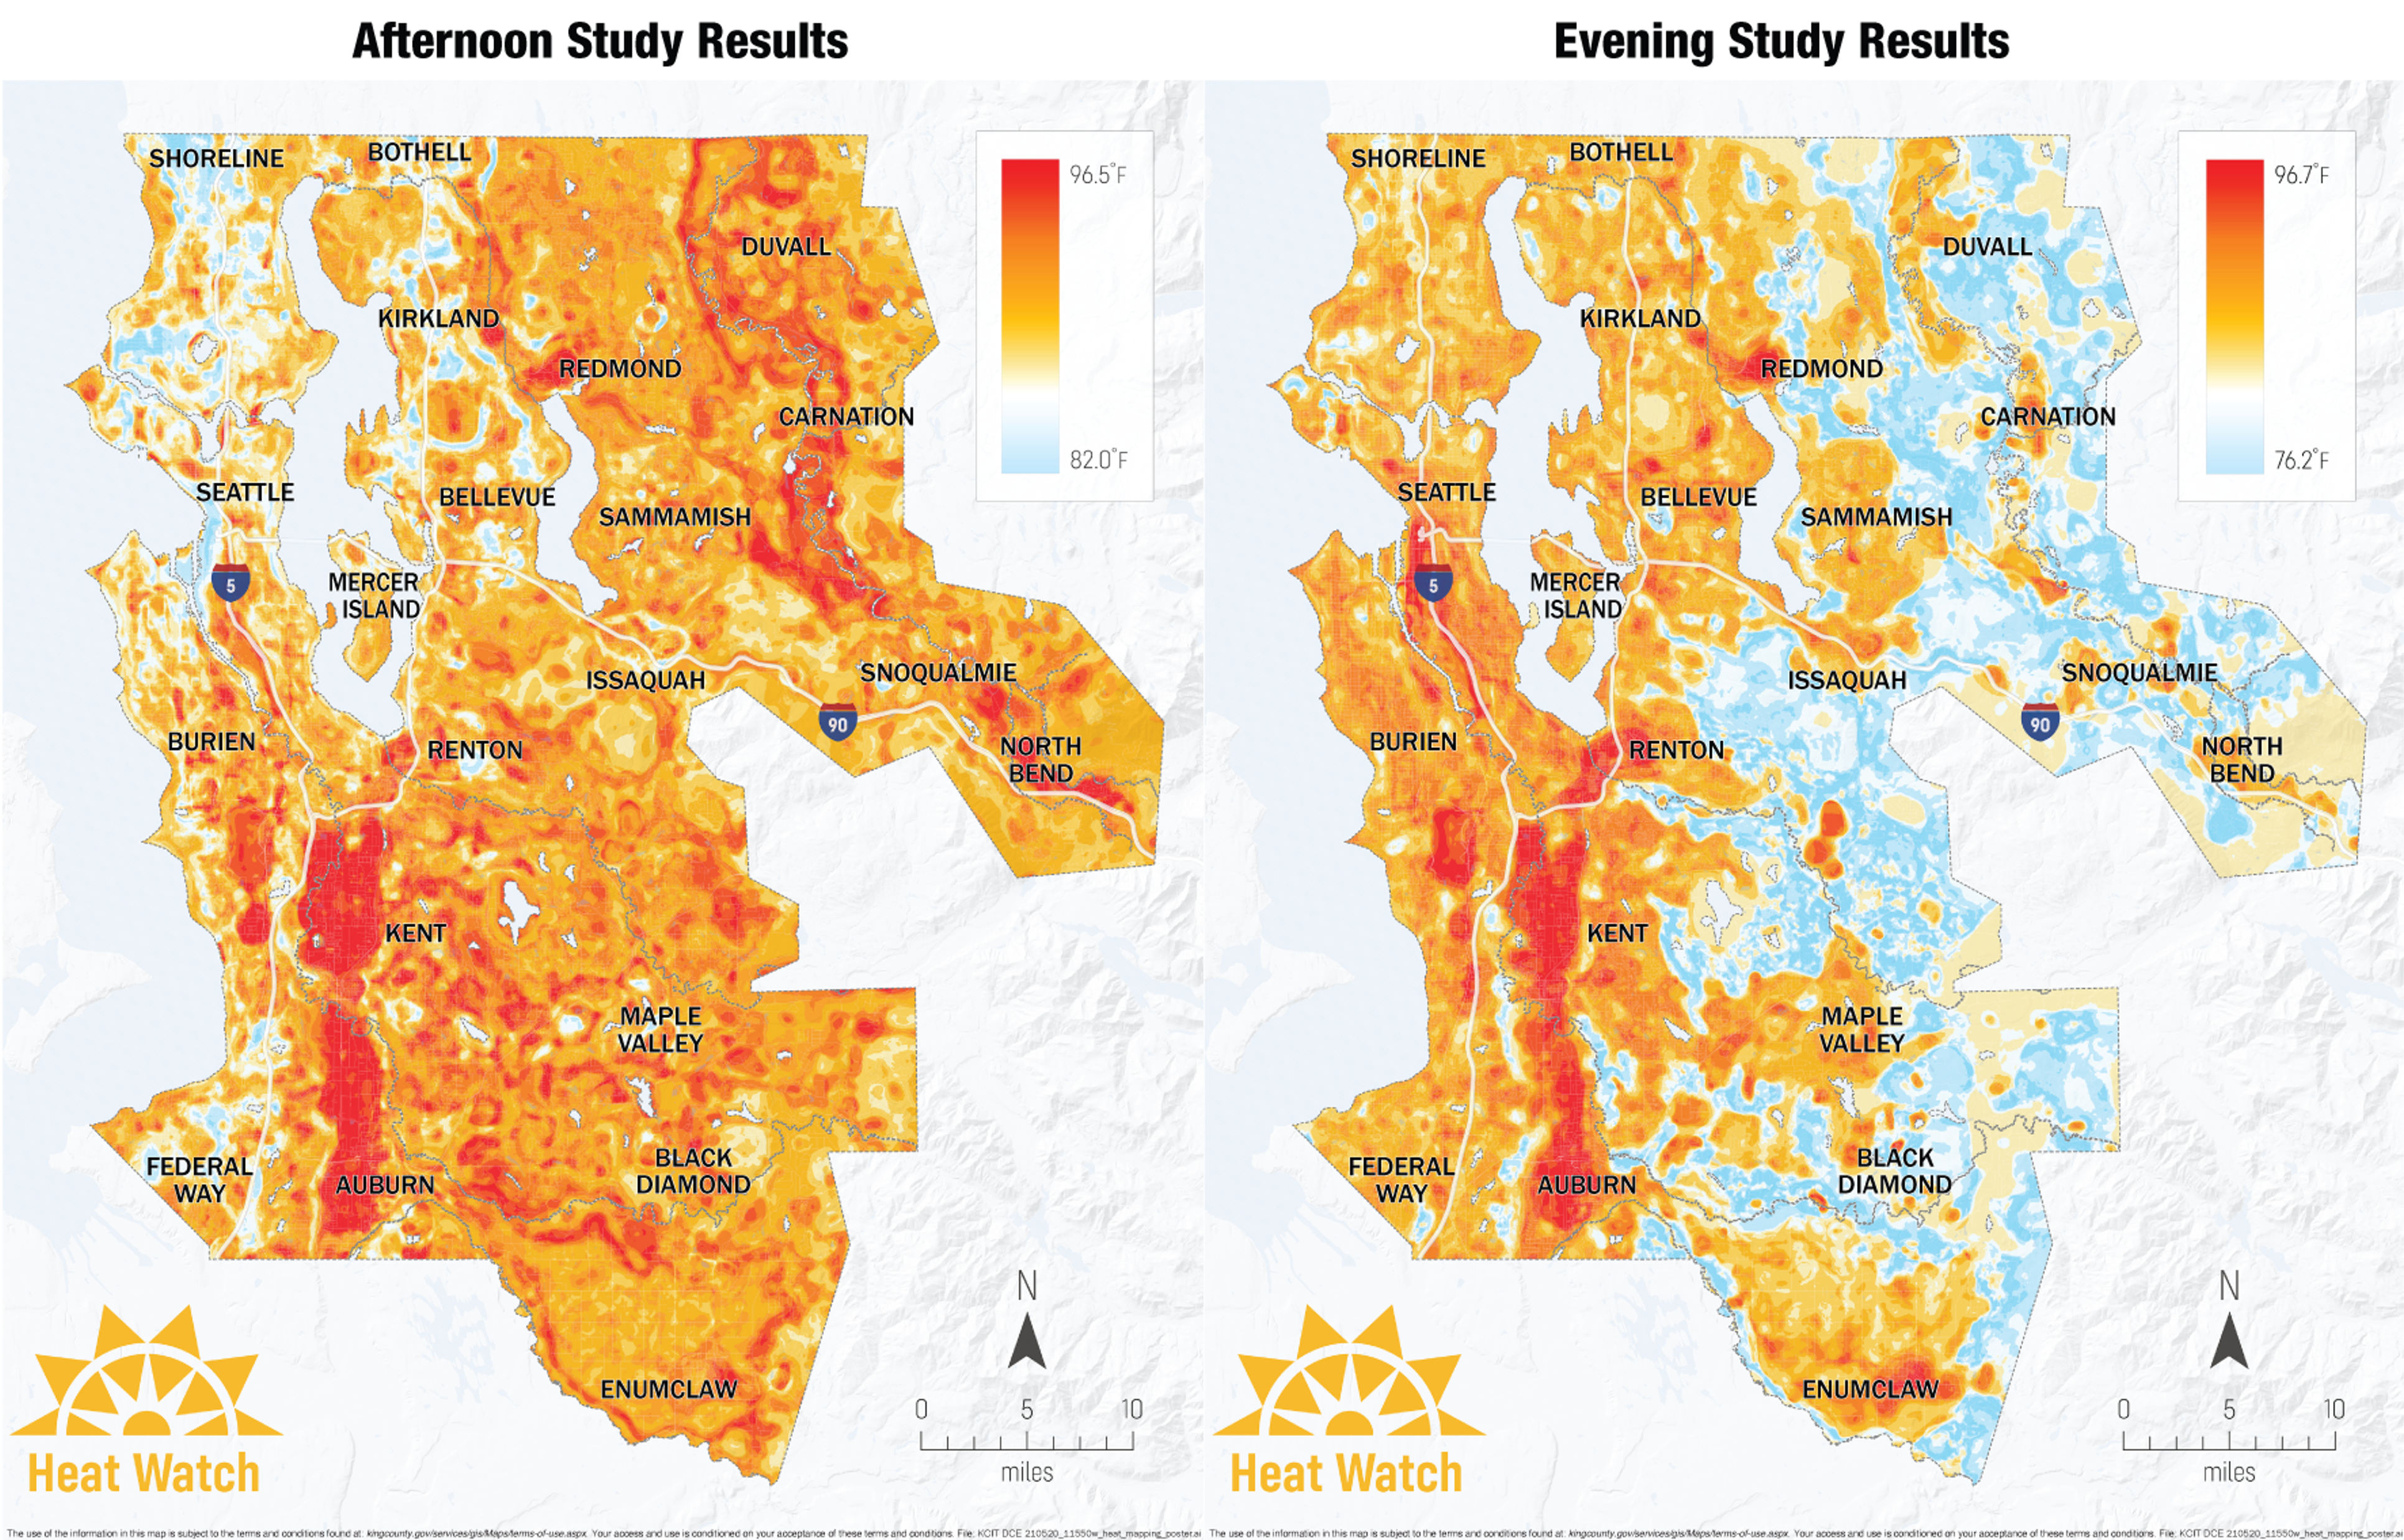 Side by side images of temperature distribution on wester King County. Left panel has afternoon results and right panel has evening study results. South Seattle near Auburn and Kent are the hottest areas in the area reaching 96 degrees.